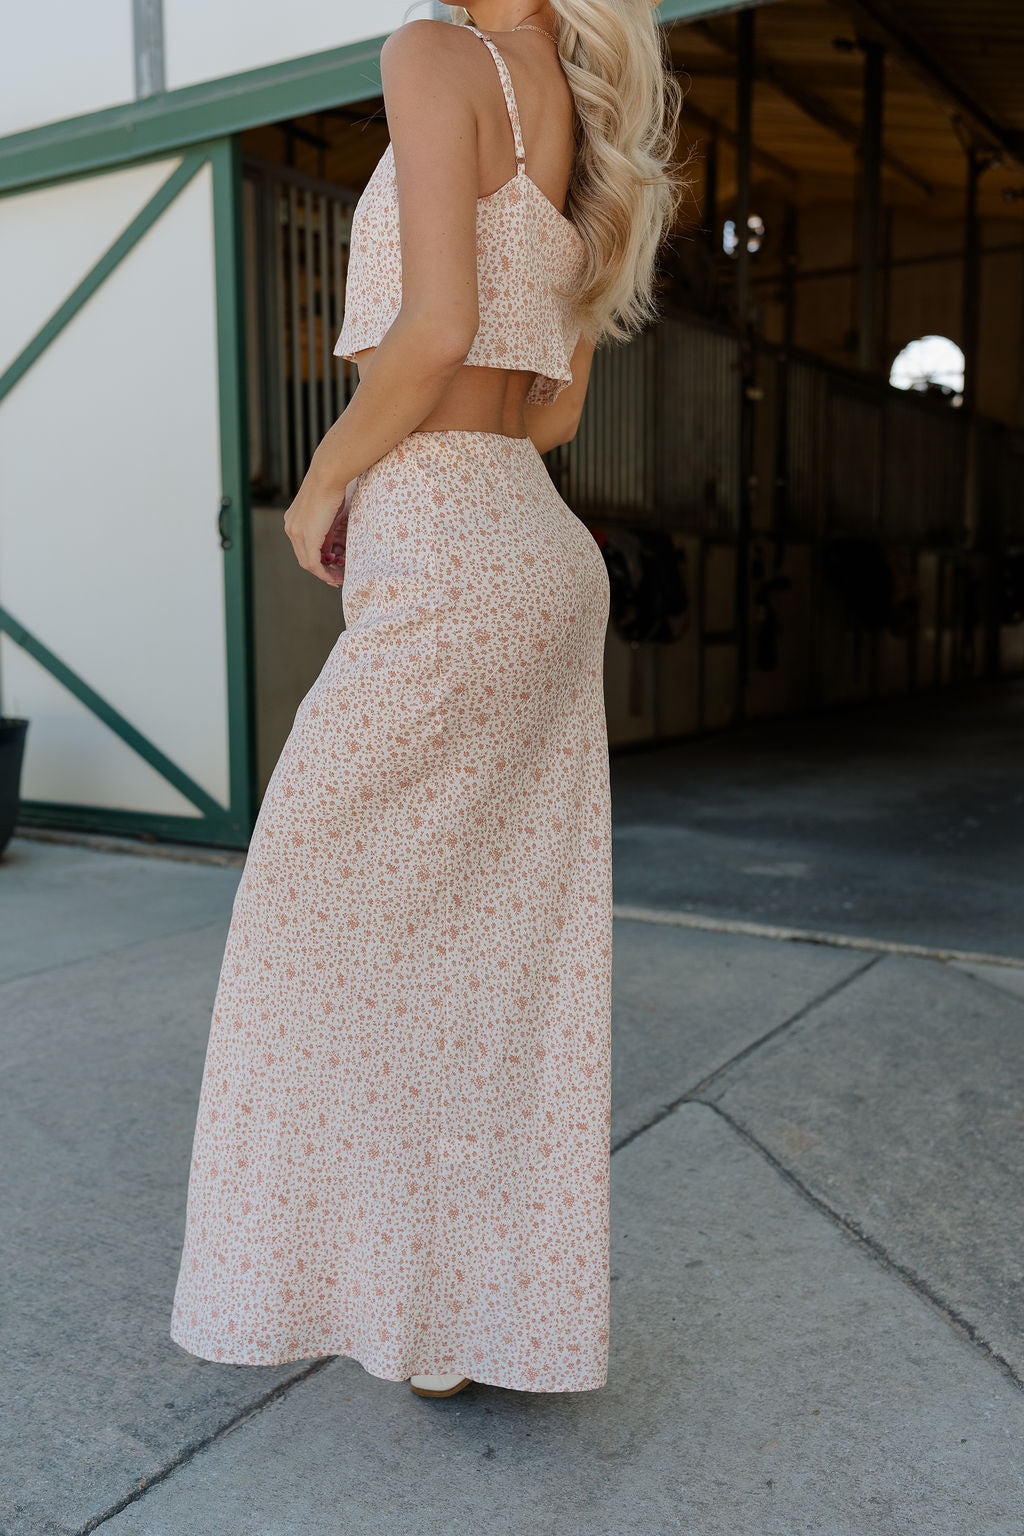 Full body side view of female model wearing the Mariah Cream Floral Midi Skirt that has cream fabric with a dusty rose floral print and elastic waist. Worn with matching tank top